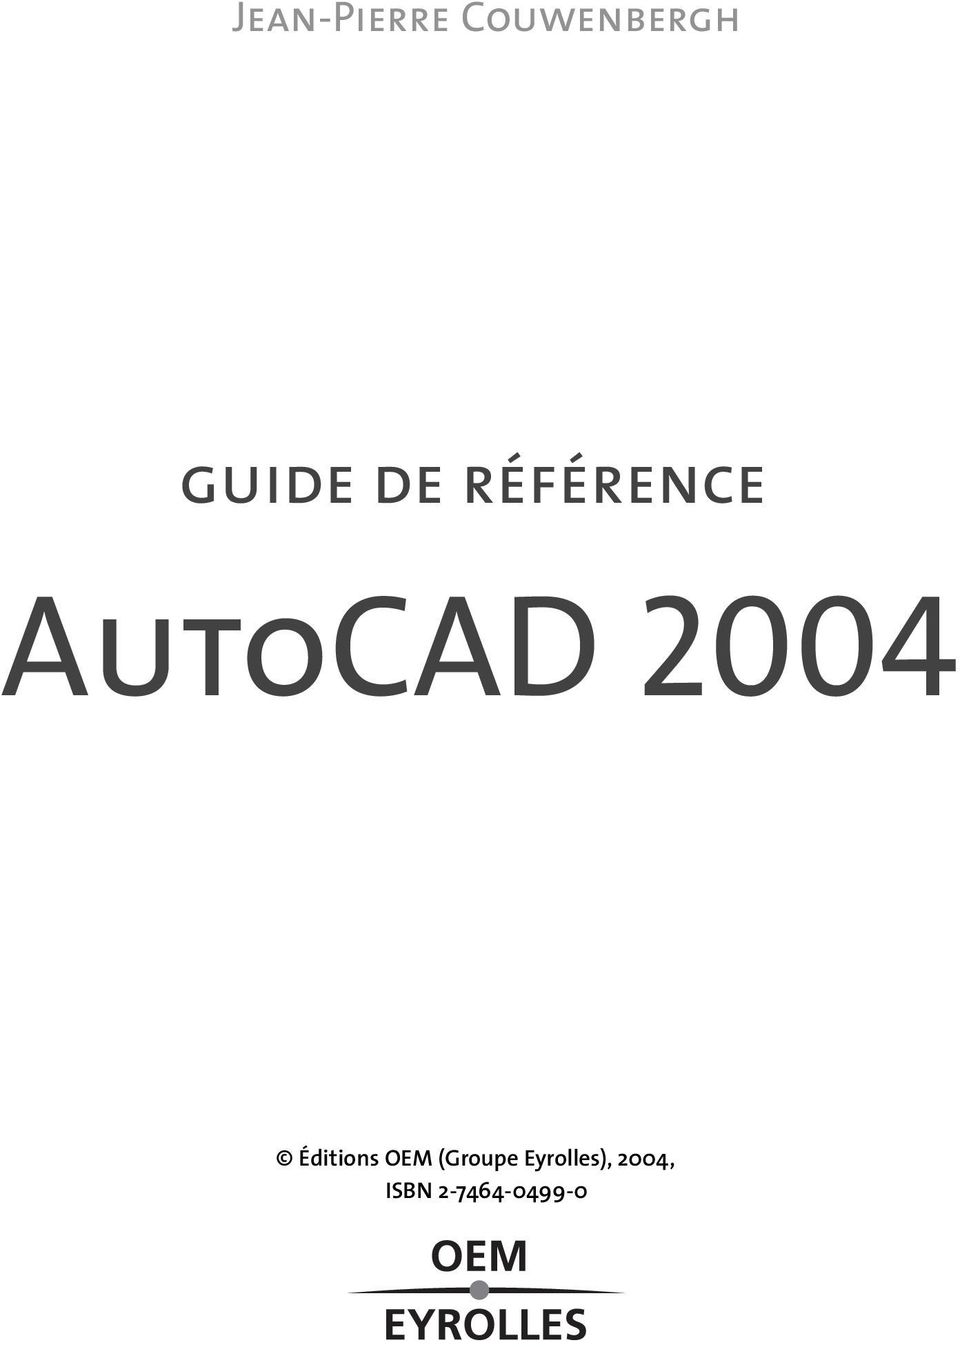 2004 Éditions OEM (Groupe